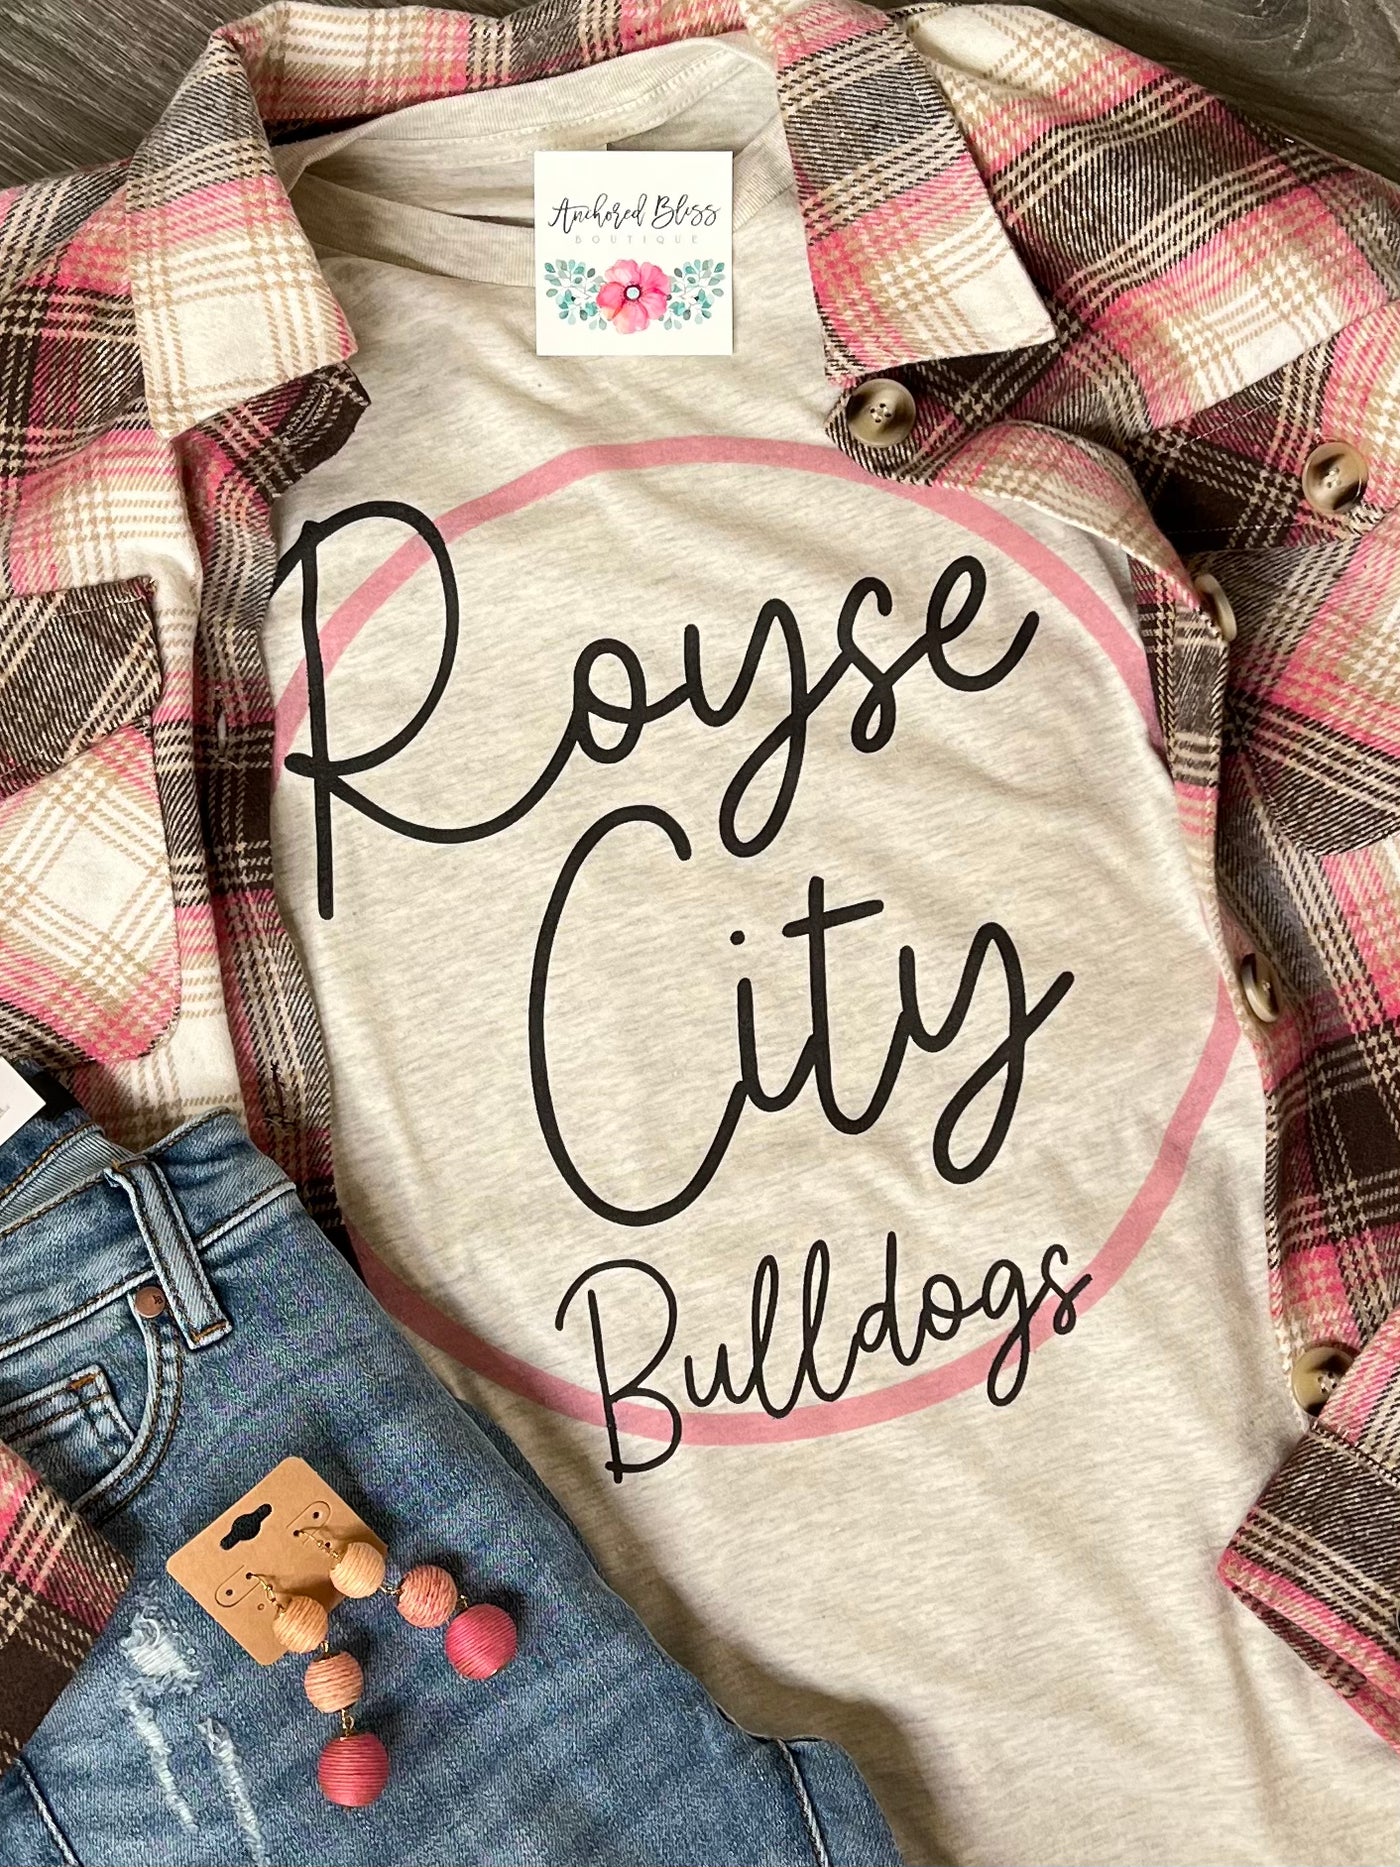 Bulldogs Sweet & Simple Circle Graphic Tee-Harps & Oli-Shop Anchored Bliss Women's Boutique Clothing Store